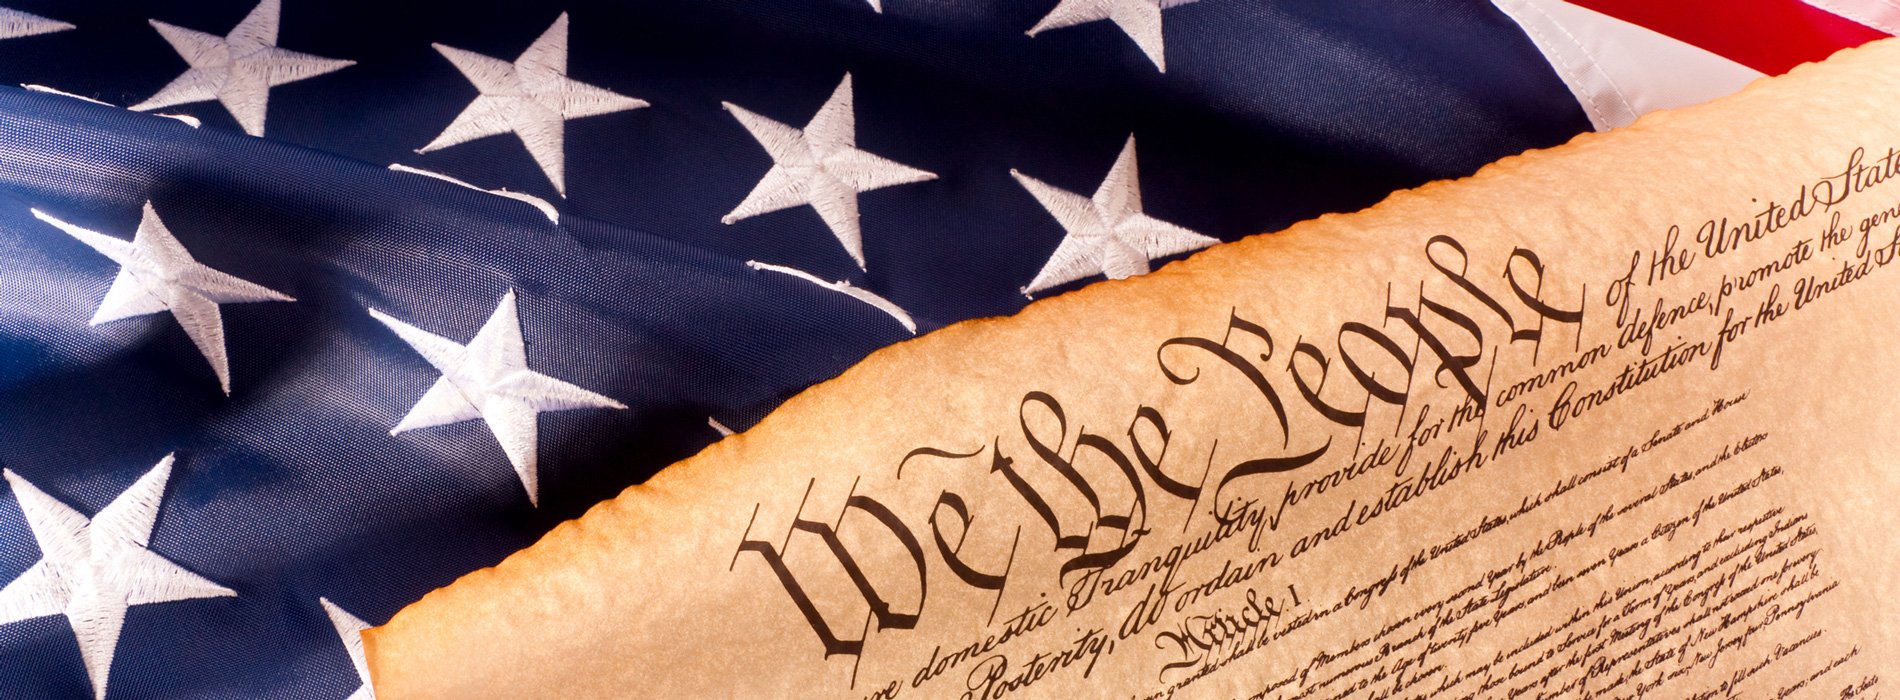 The United States Constitution against the American flag.